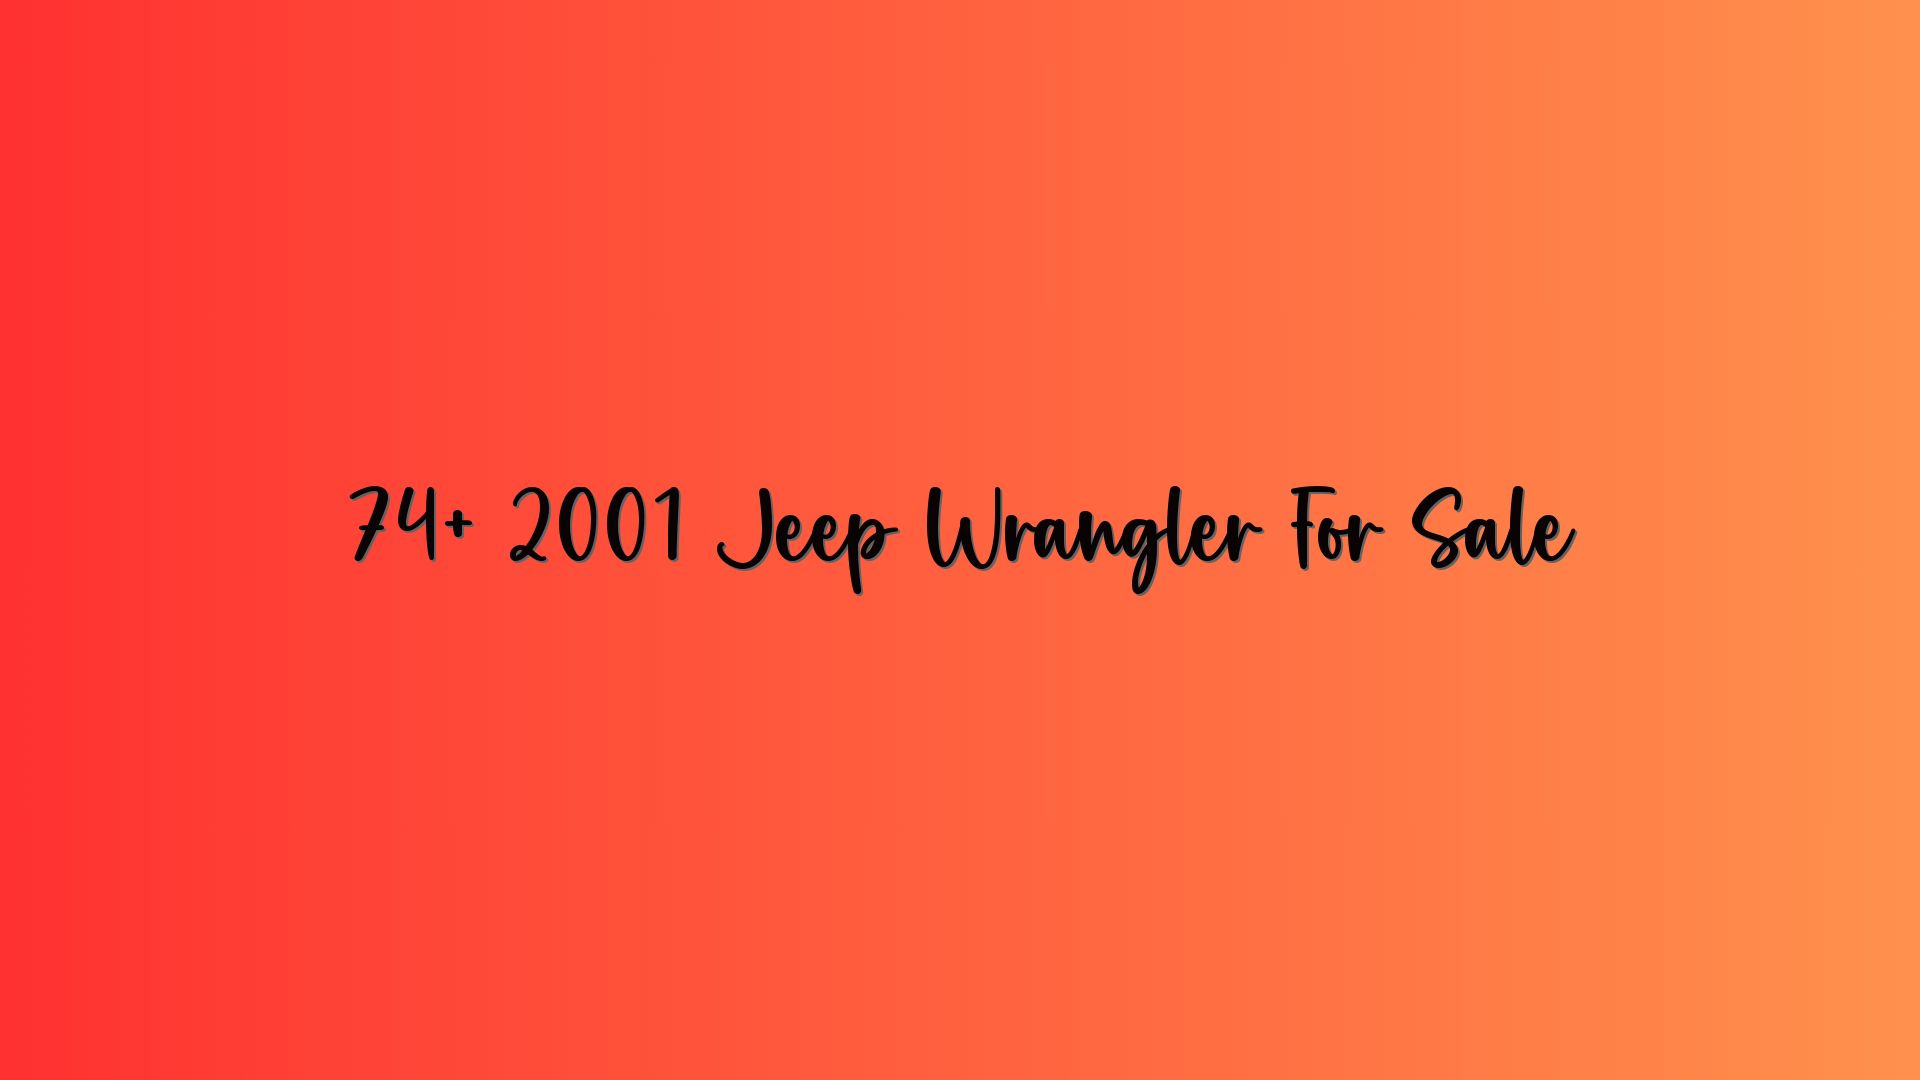 74+ 2001 Jeep Wrangler For Sale